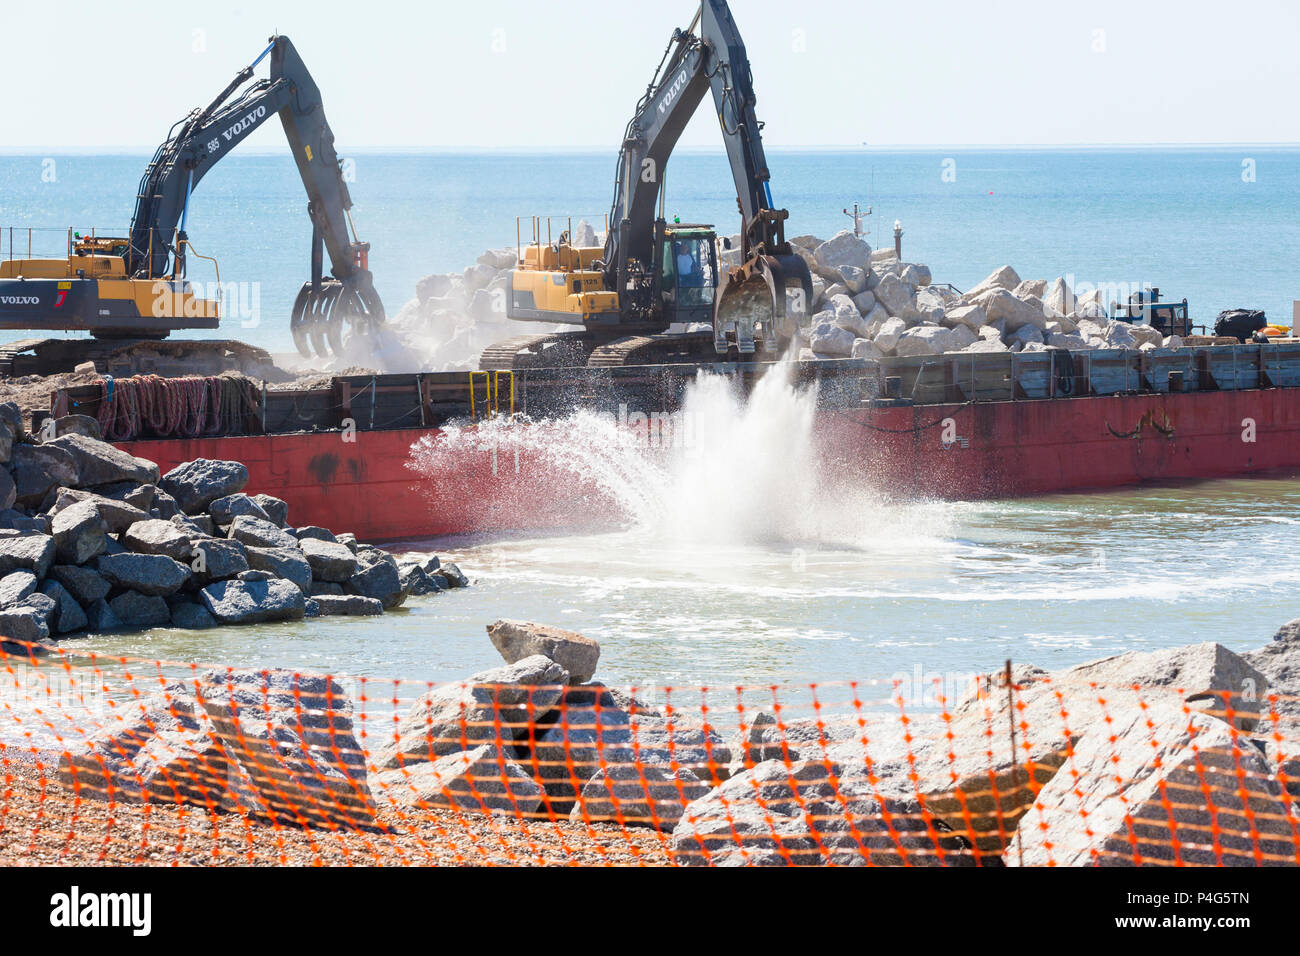 Hastings, East Sussex, UK. 22nd Jun, 2018. The construction of two new coastal protection breakwater rock groynes is under way to help keep the beach in place and protect the sea wall. The contract for the works was won by J. T. Mackley Ltd, an experienced coastal civil engineering contractor. 5,000 tonnes of Norwegian granite rock will delivered by sea, it is expected that the works will last 10 weeks dependent of the weather conditions. © Paul Lawrenson 2018, Photo Credit: Paul Lawrenson / Alamy Live News Stock Photo